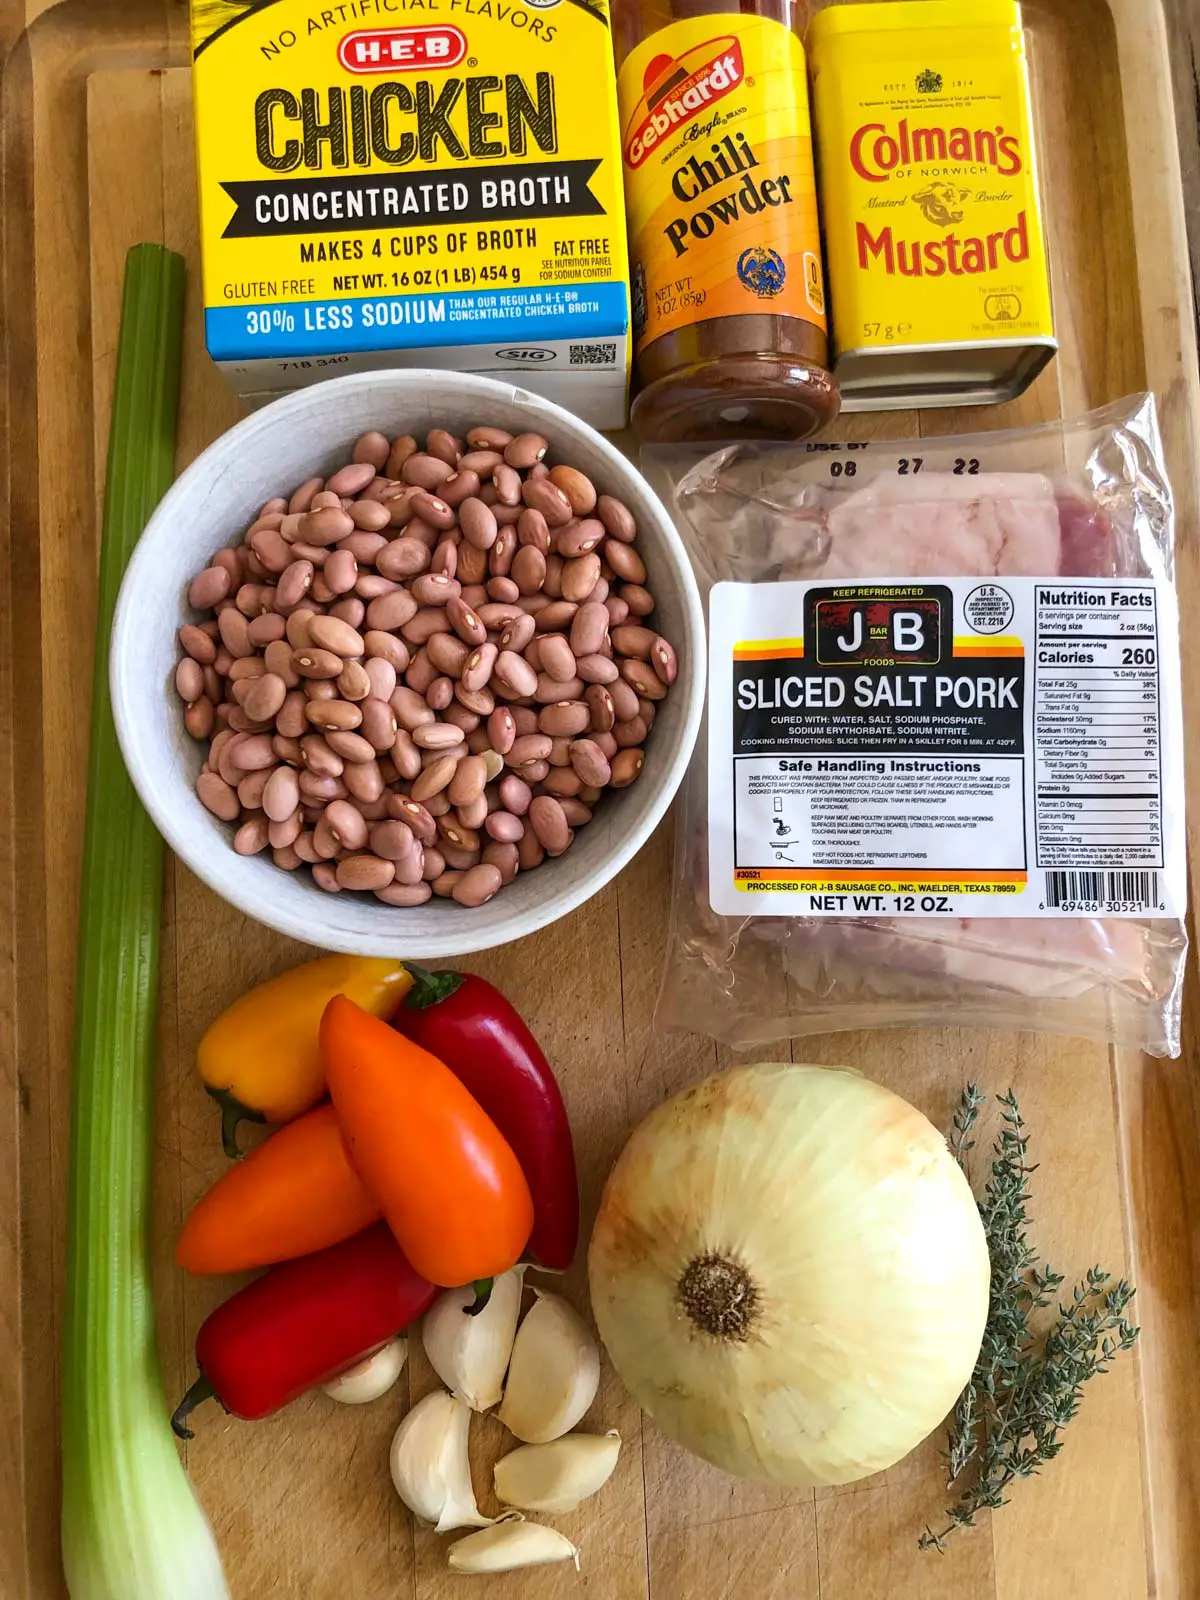 Pink beans in a white bowl, celery stalk, red, orange and yellow sweet peppers, garlic cloves, onion, fresh thyme, package of sliced salt pork, chicken broth, chili powder and Colman's mustard.